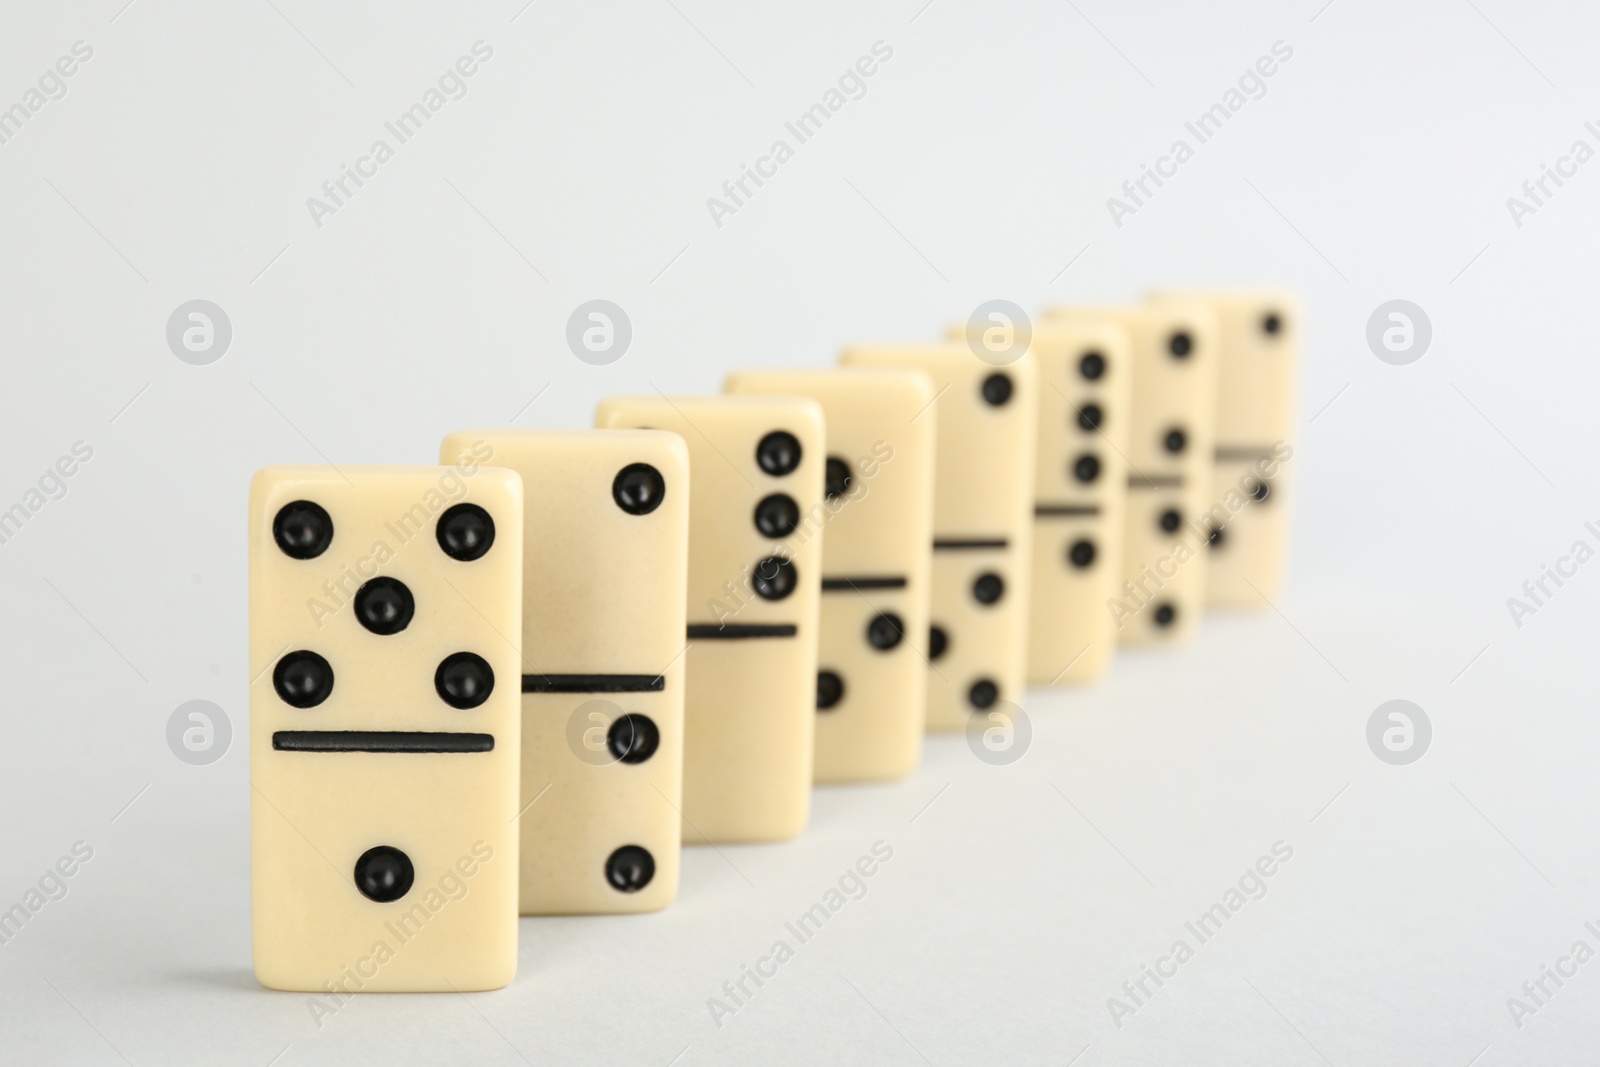 Photo of Row of domino tiles on white background